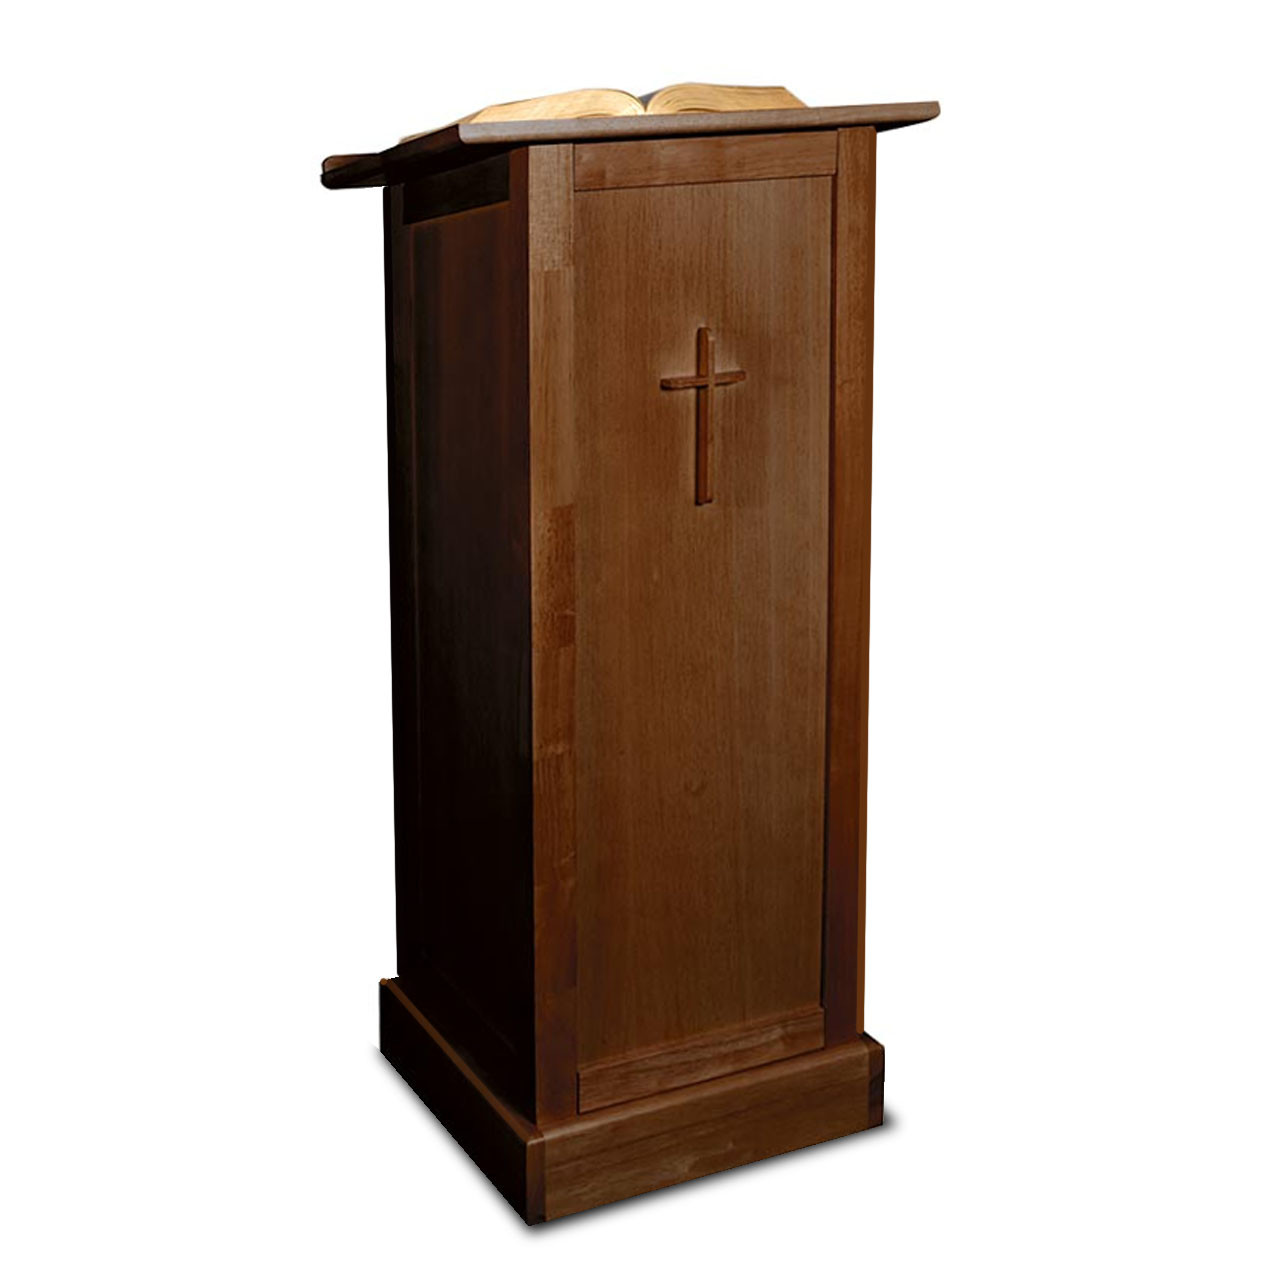 MD015  Maple Wood Lectern with Shelf